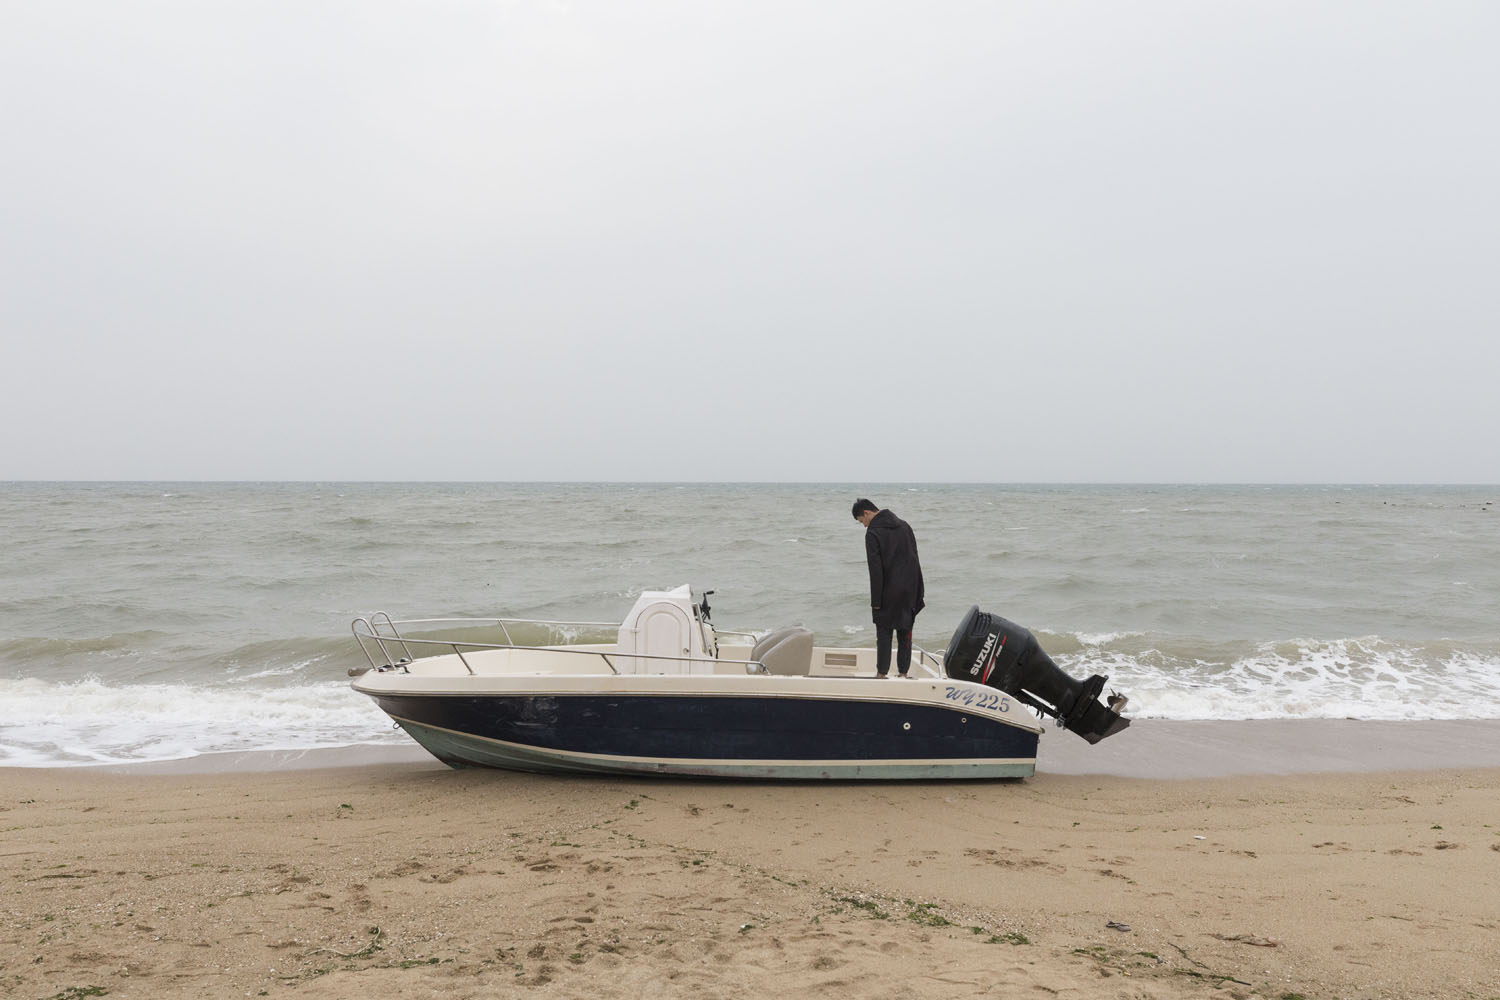 A beached boat used for beach goers and tourists at Guanyinshan Fantasy Beach. Xiamen, China. 2018.